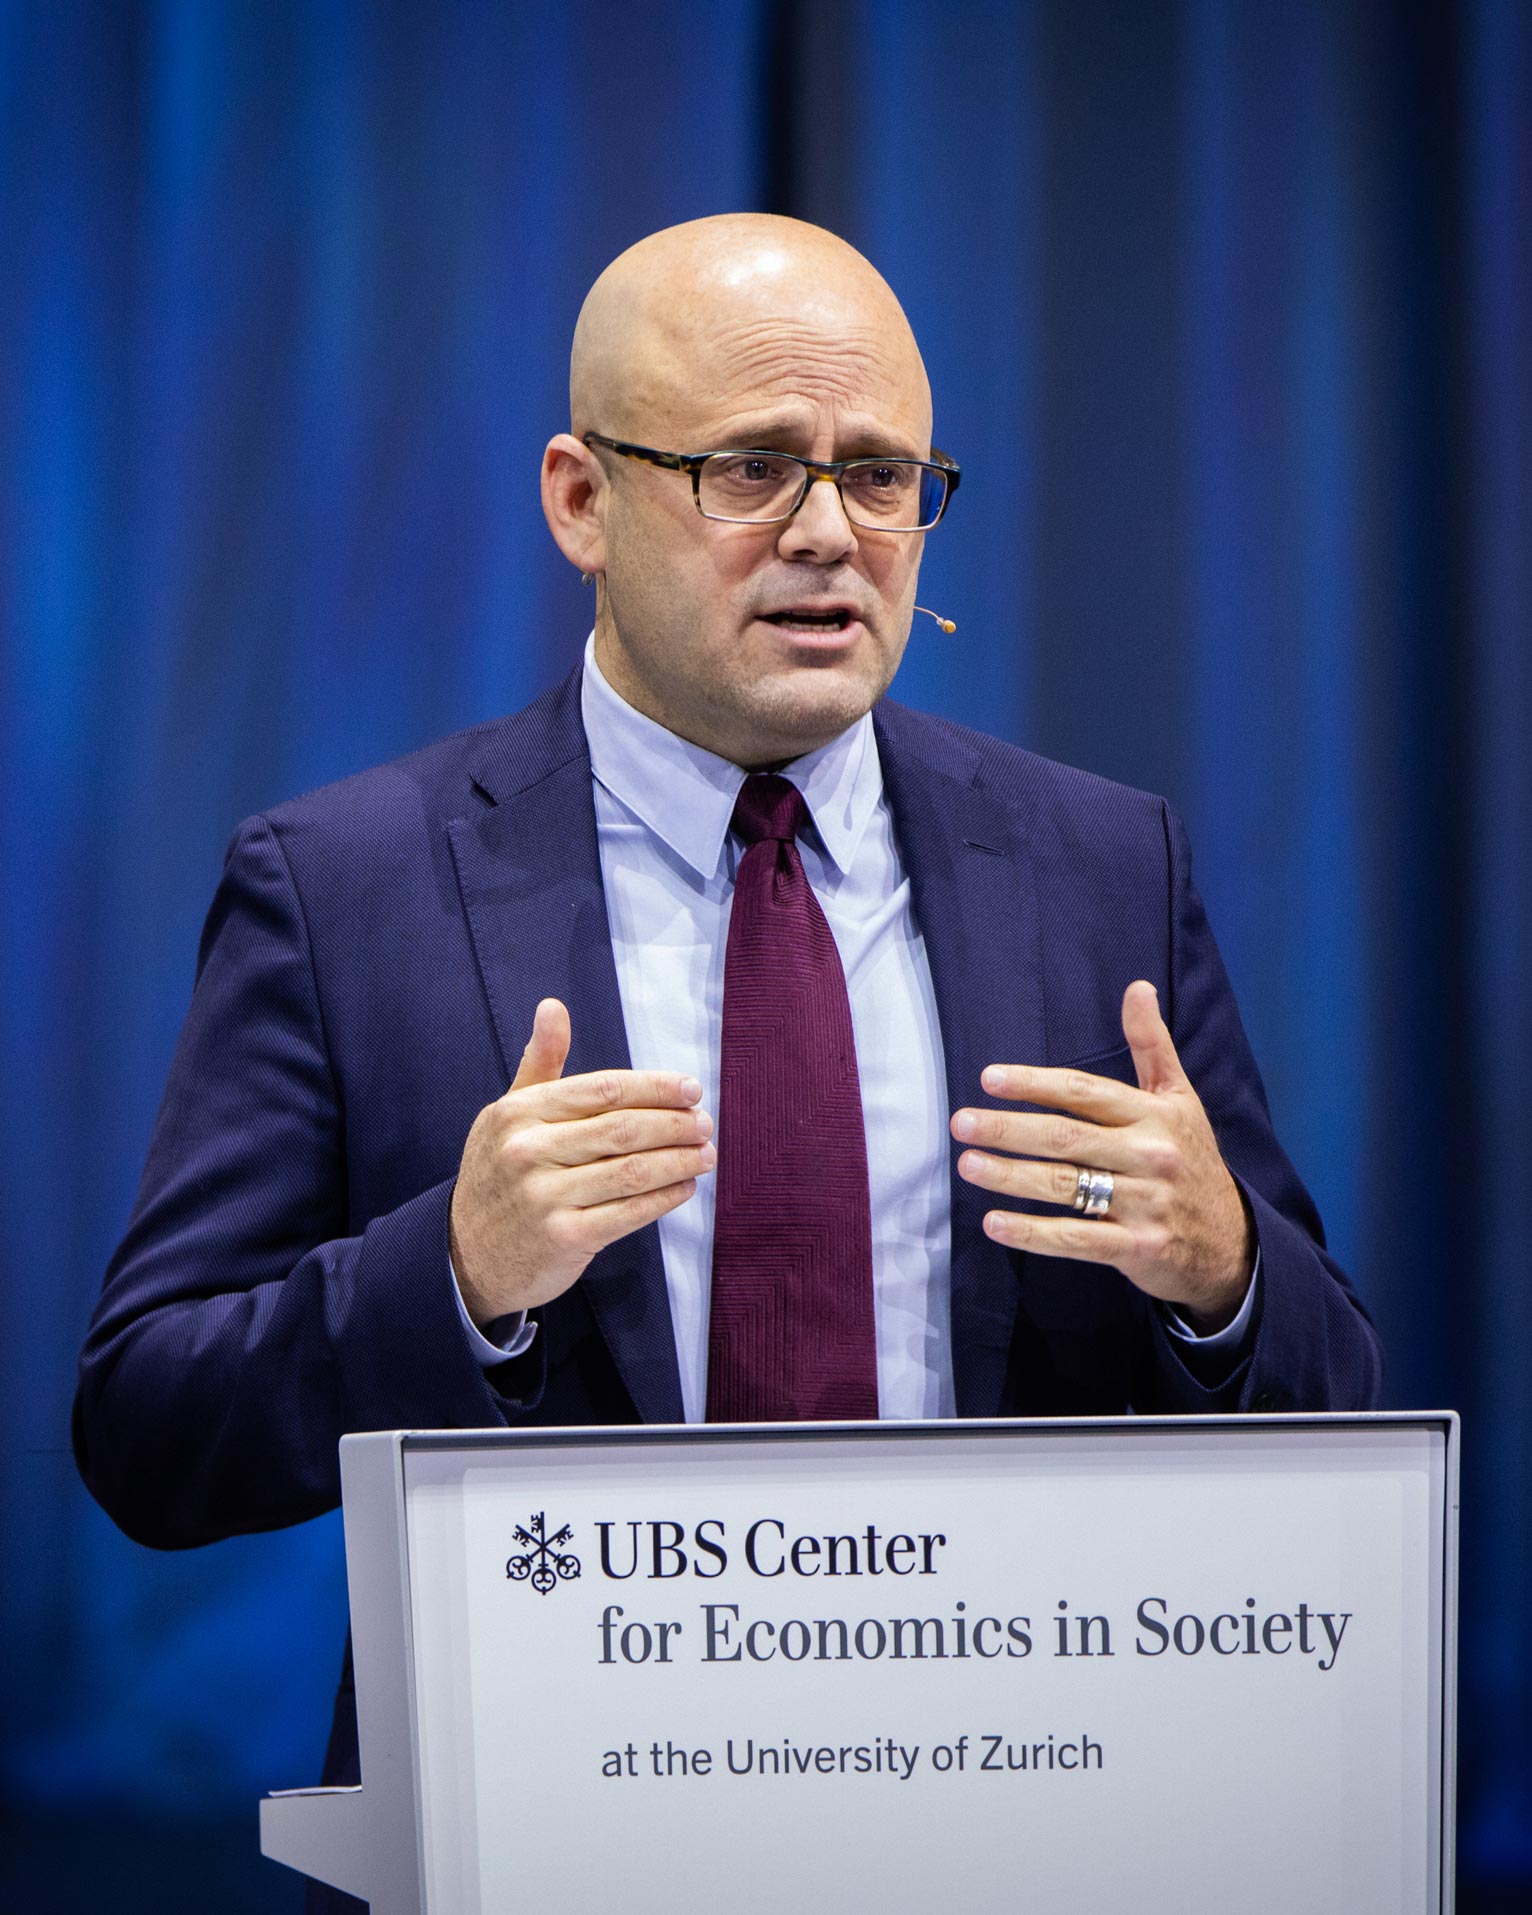 Daniel Ziblatt is Professor of Political Science at Harvard University and Director of the Department "Transformations of Democracy" at the WZB in Berlin. Together with Steven Levitsky, he published the bestseller 'How Democracies Die' in 2018. Their new book 'Tyranny of the Minority' has also been critically acclaimed.